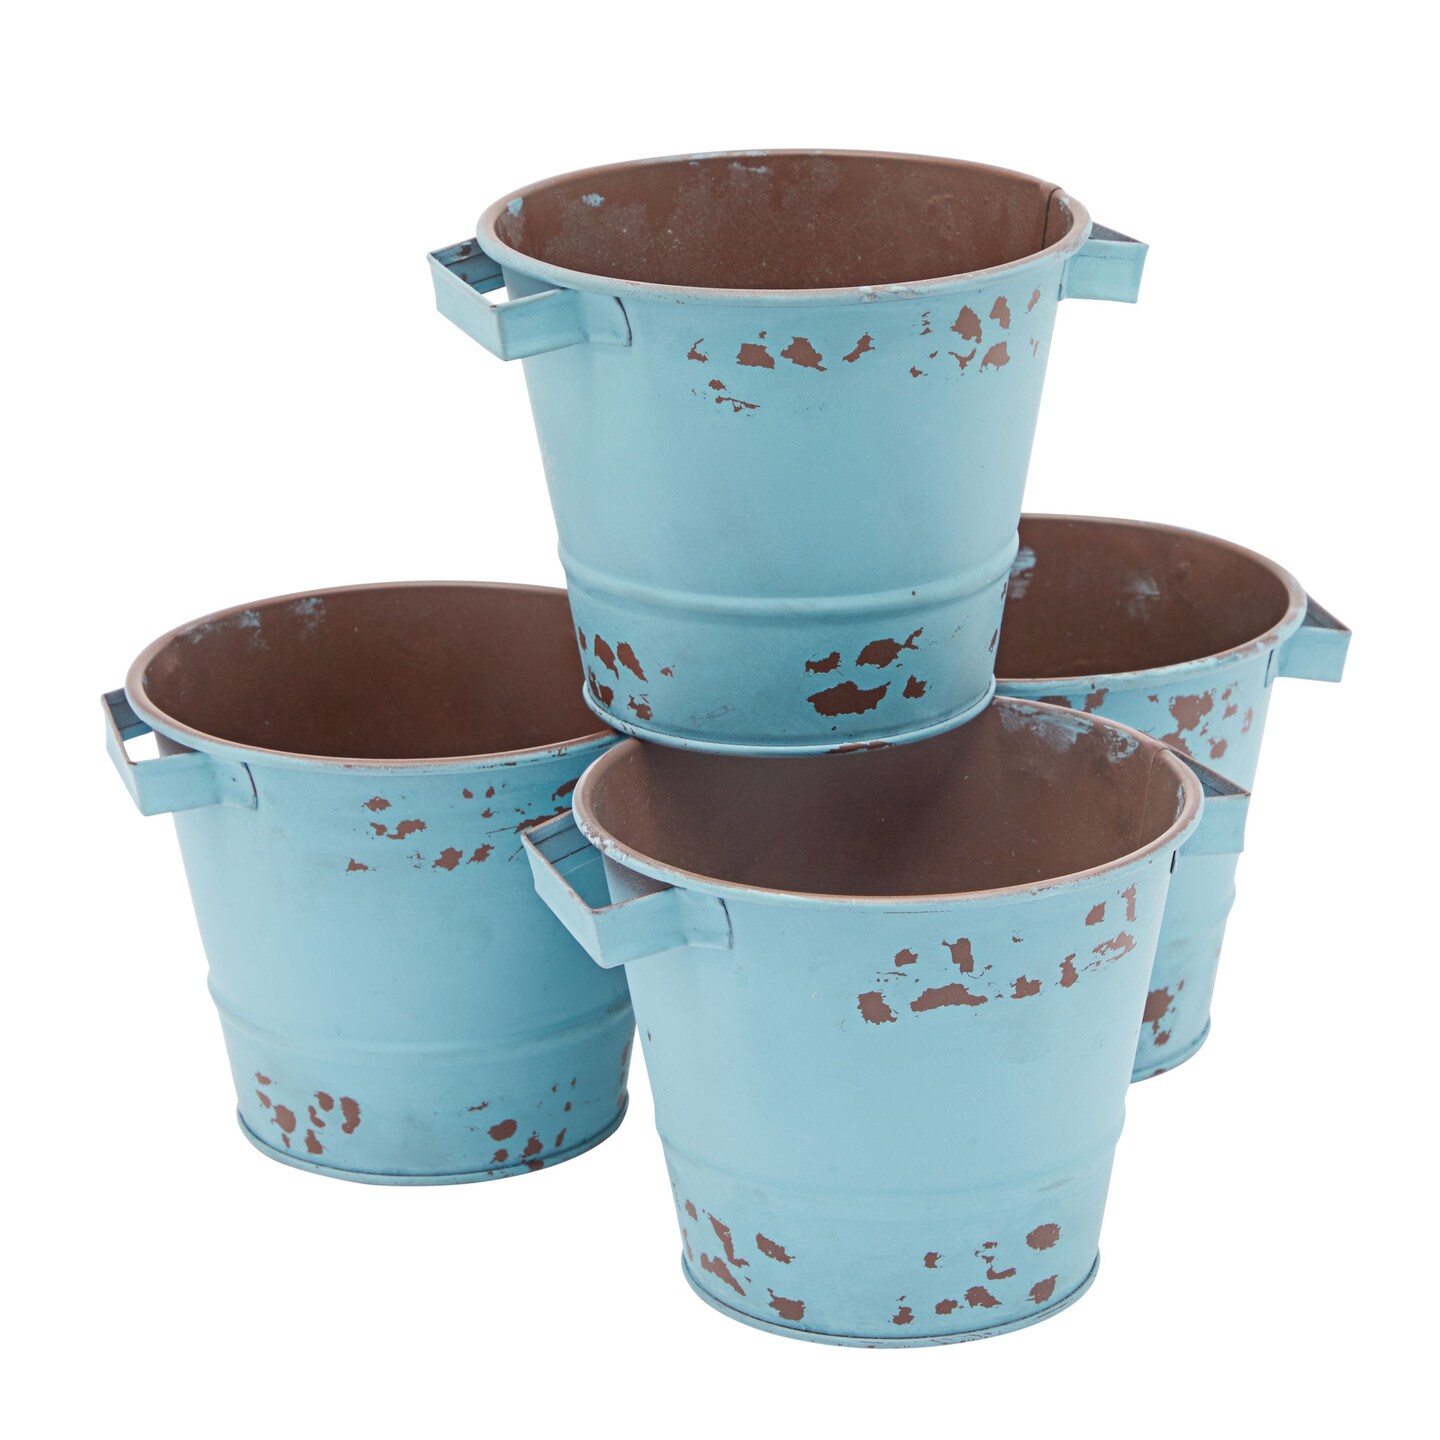 4 Pack Small Distressed Blue Metal Buckets, Rustic 4 Inch Tin Pails, Decorative Vintage Flower Pots for Gardening (5 x 4 In)